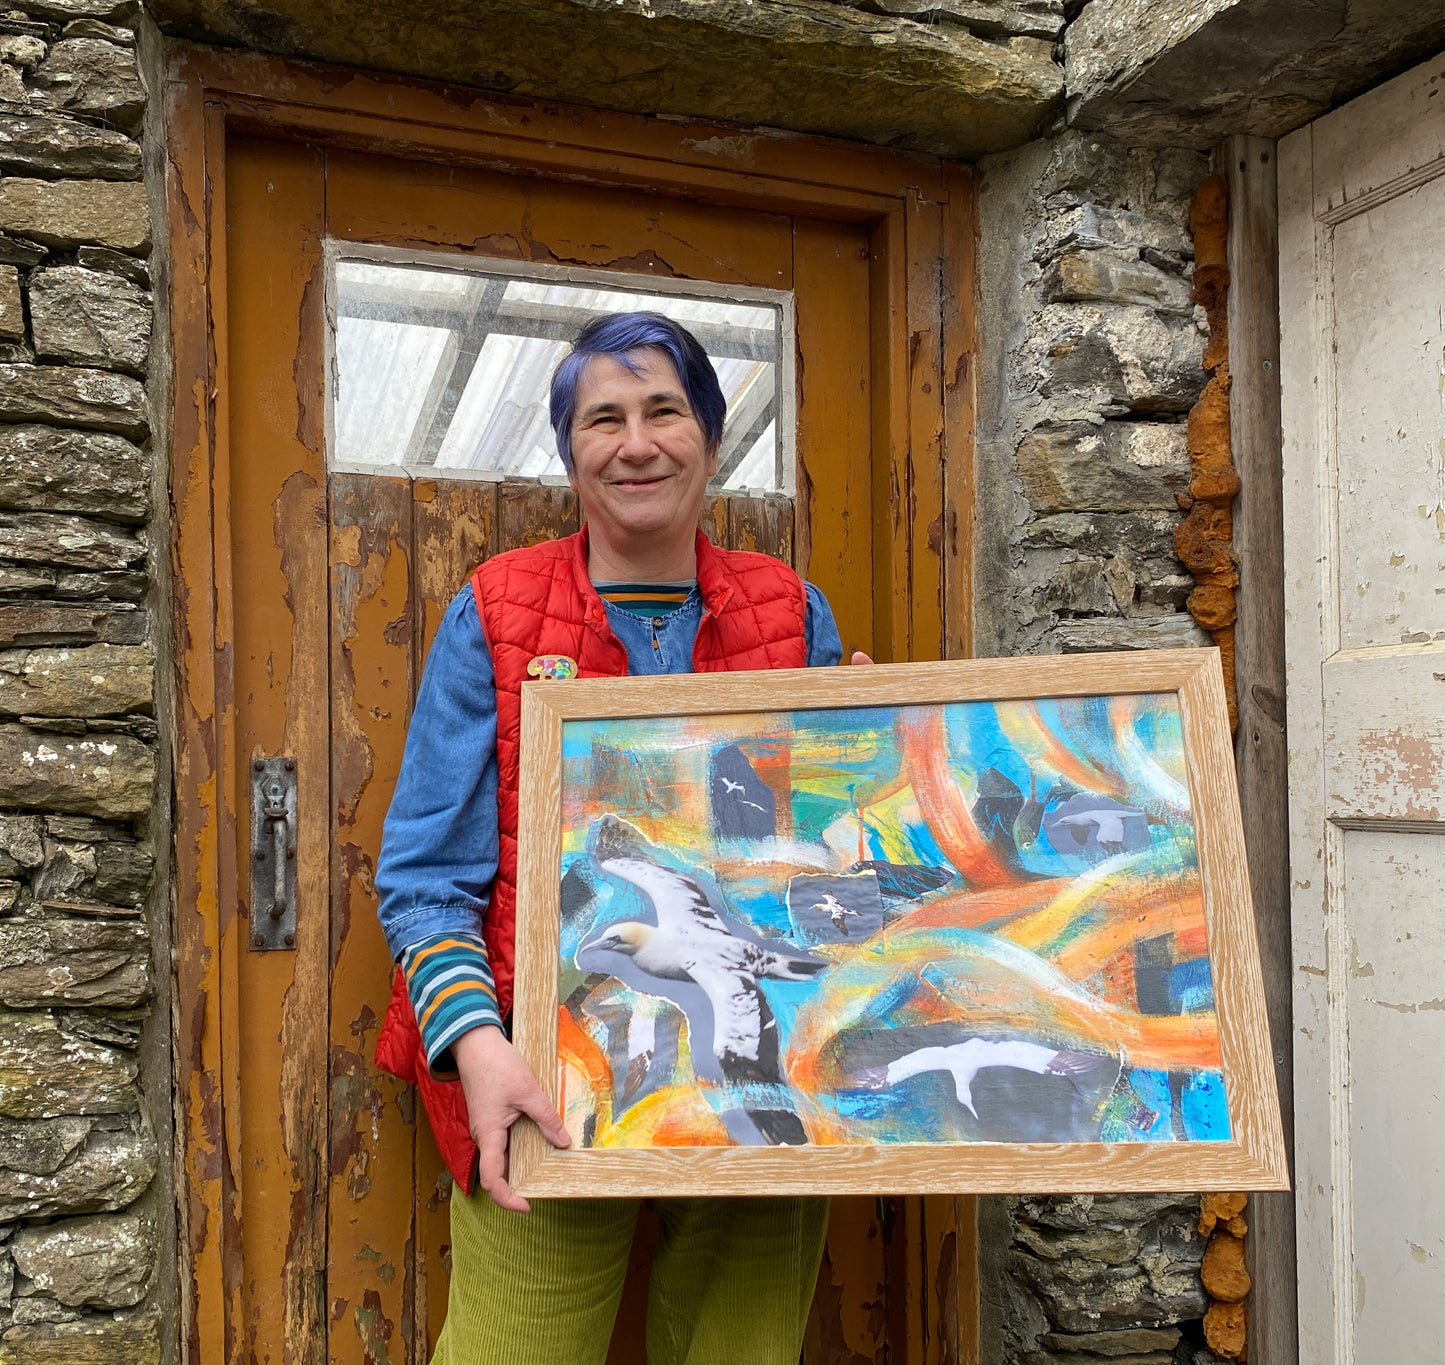 A photograph of Orkney artist Jane Glue holding her original painting of Gannets on a summers day in Orkney, Scotland